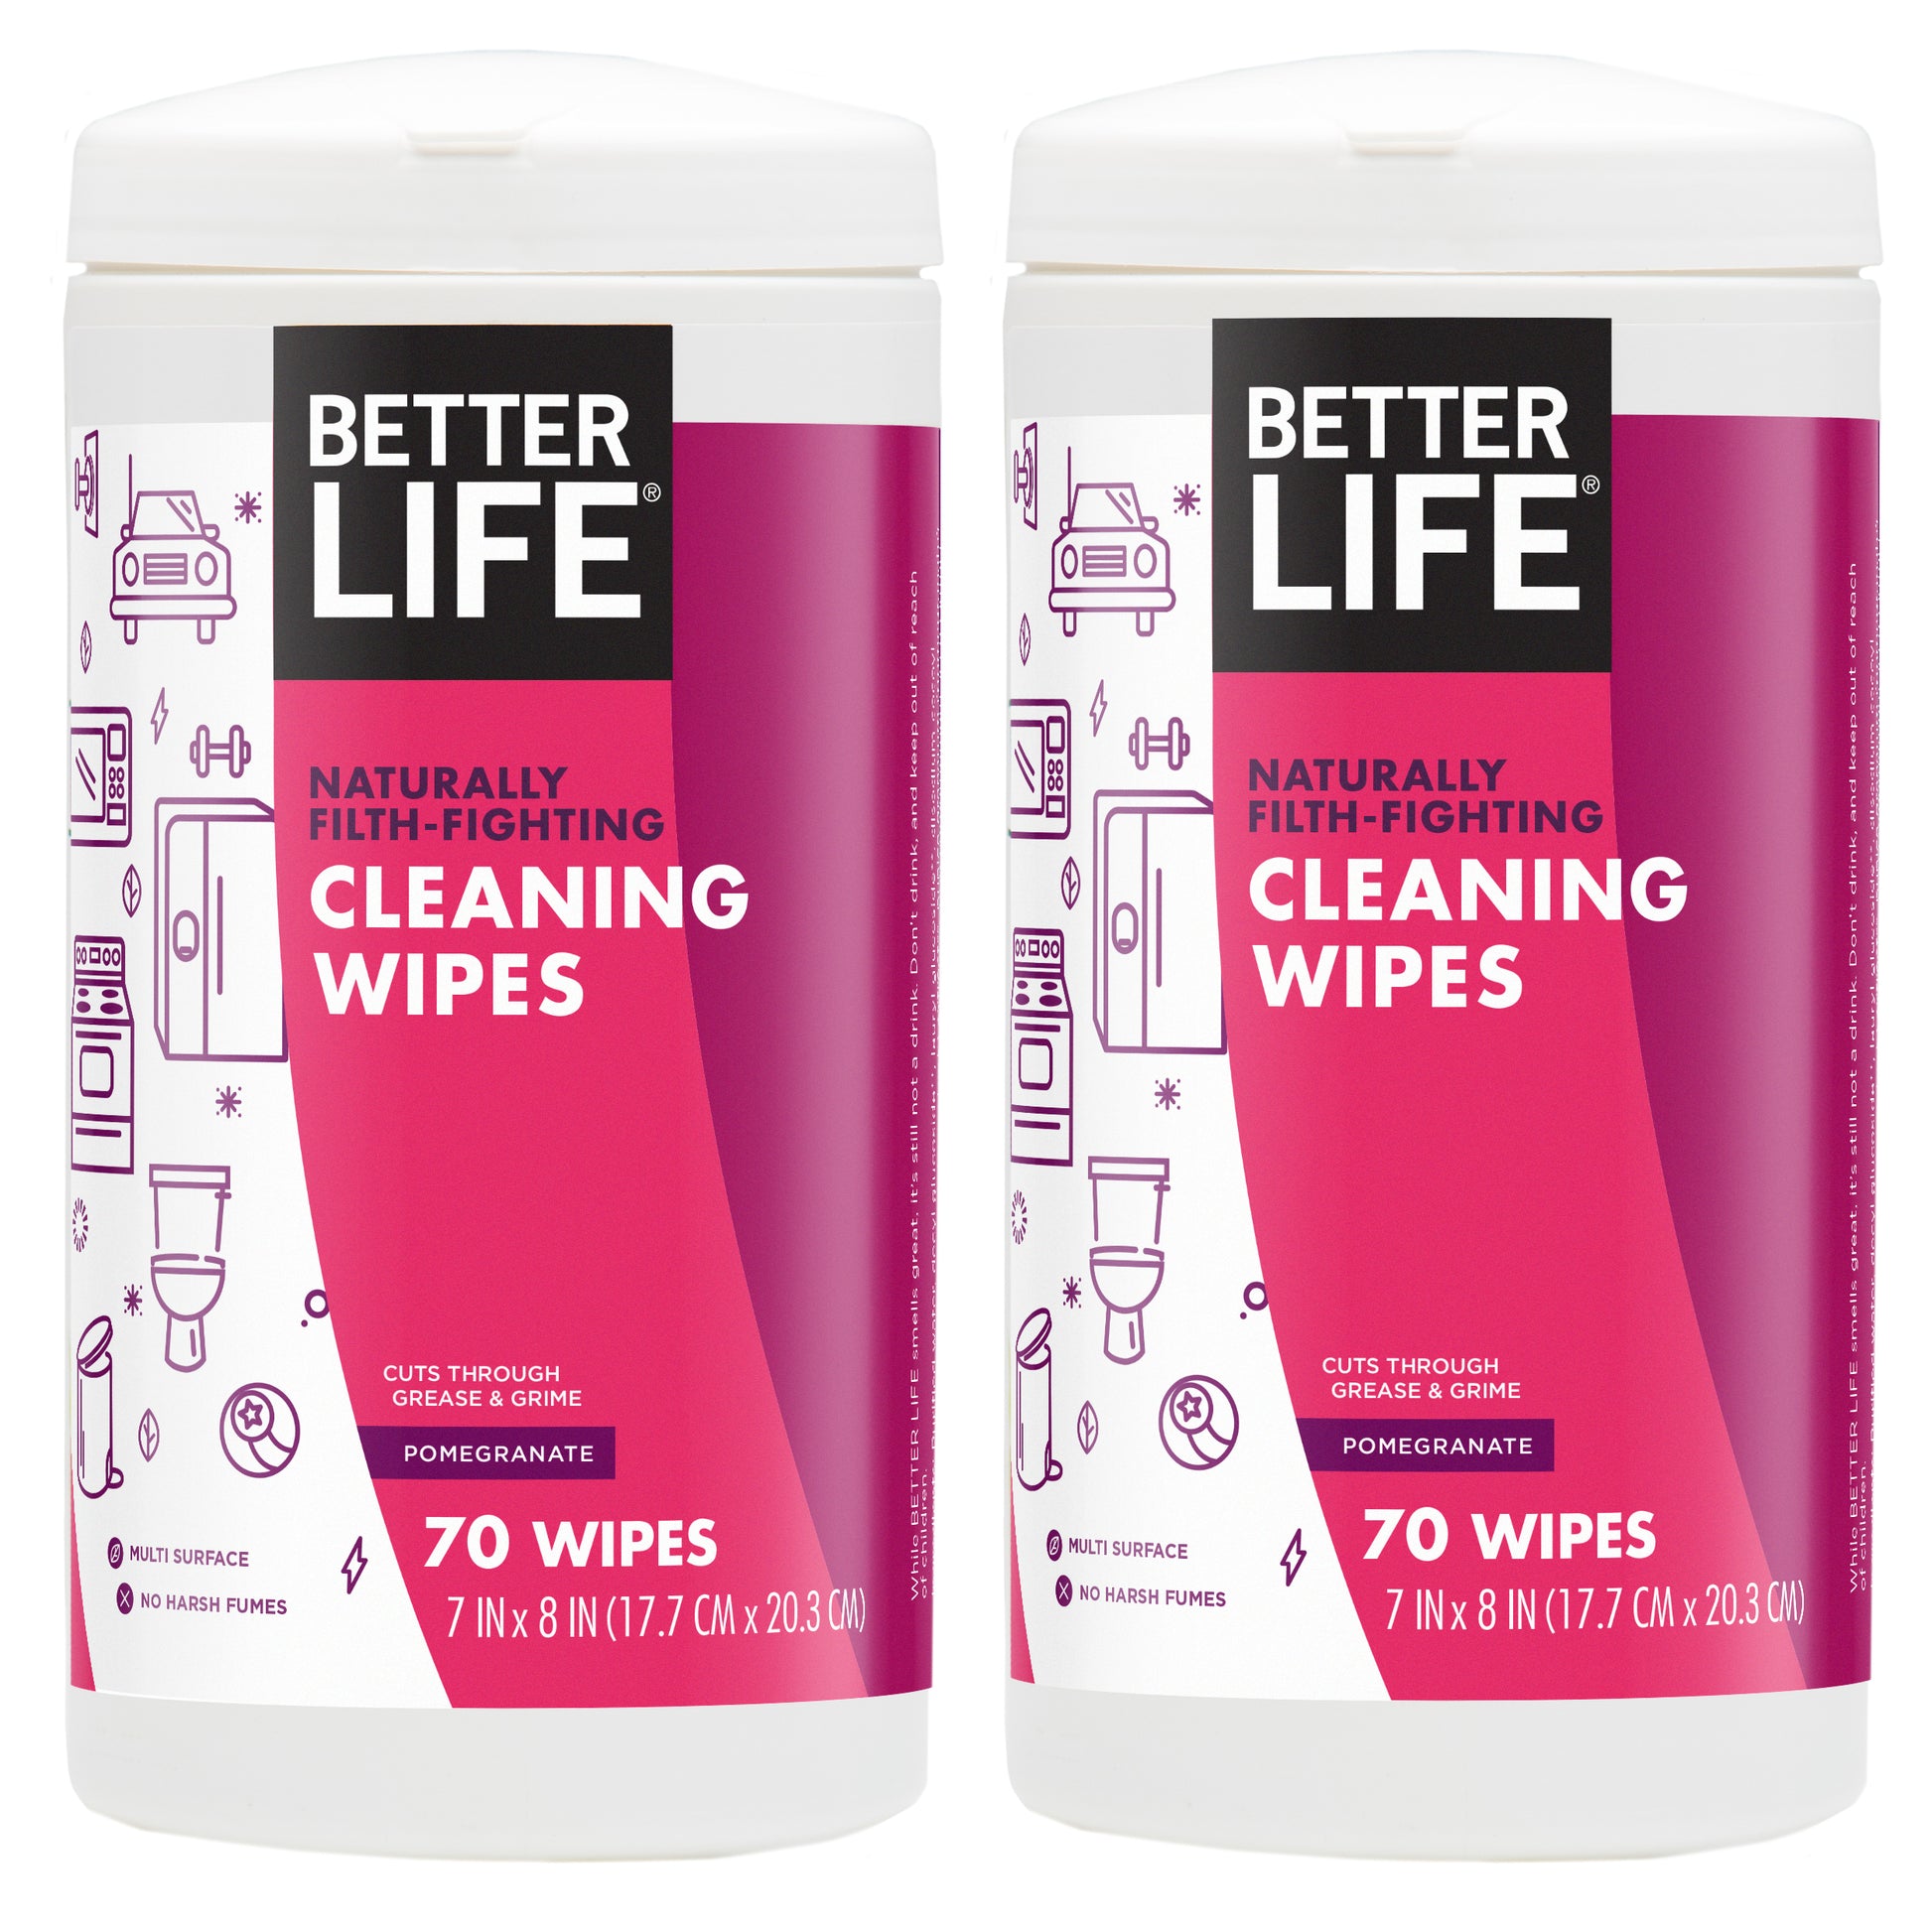 Natural All-Purpose Cleaning Wipes – Better Life